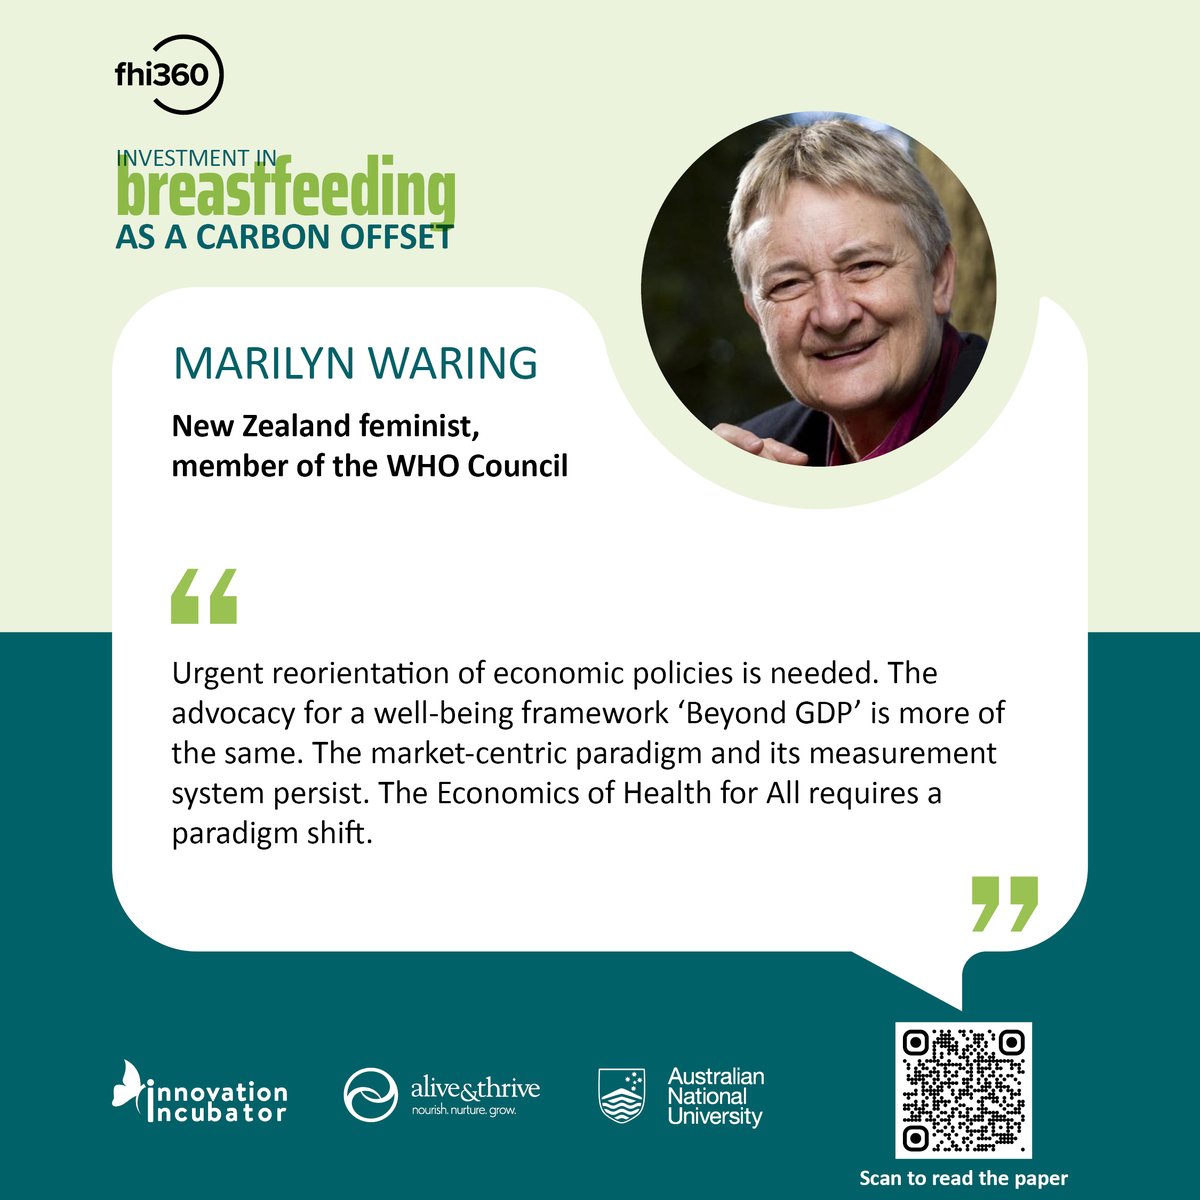 “Urgent reorientation of economic policies is needed. The advocacy for a well-being framework ‘Beyond GDP’ is more of the same. ... The Economics of Health for All requires a paradigm shift.” - Marilyn Waring, New Zealand bit.ly/Breastfeedinga… #BreastfeedingasCarbonOffset